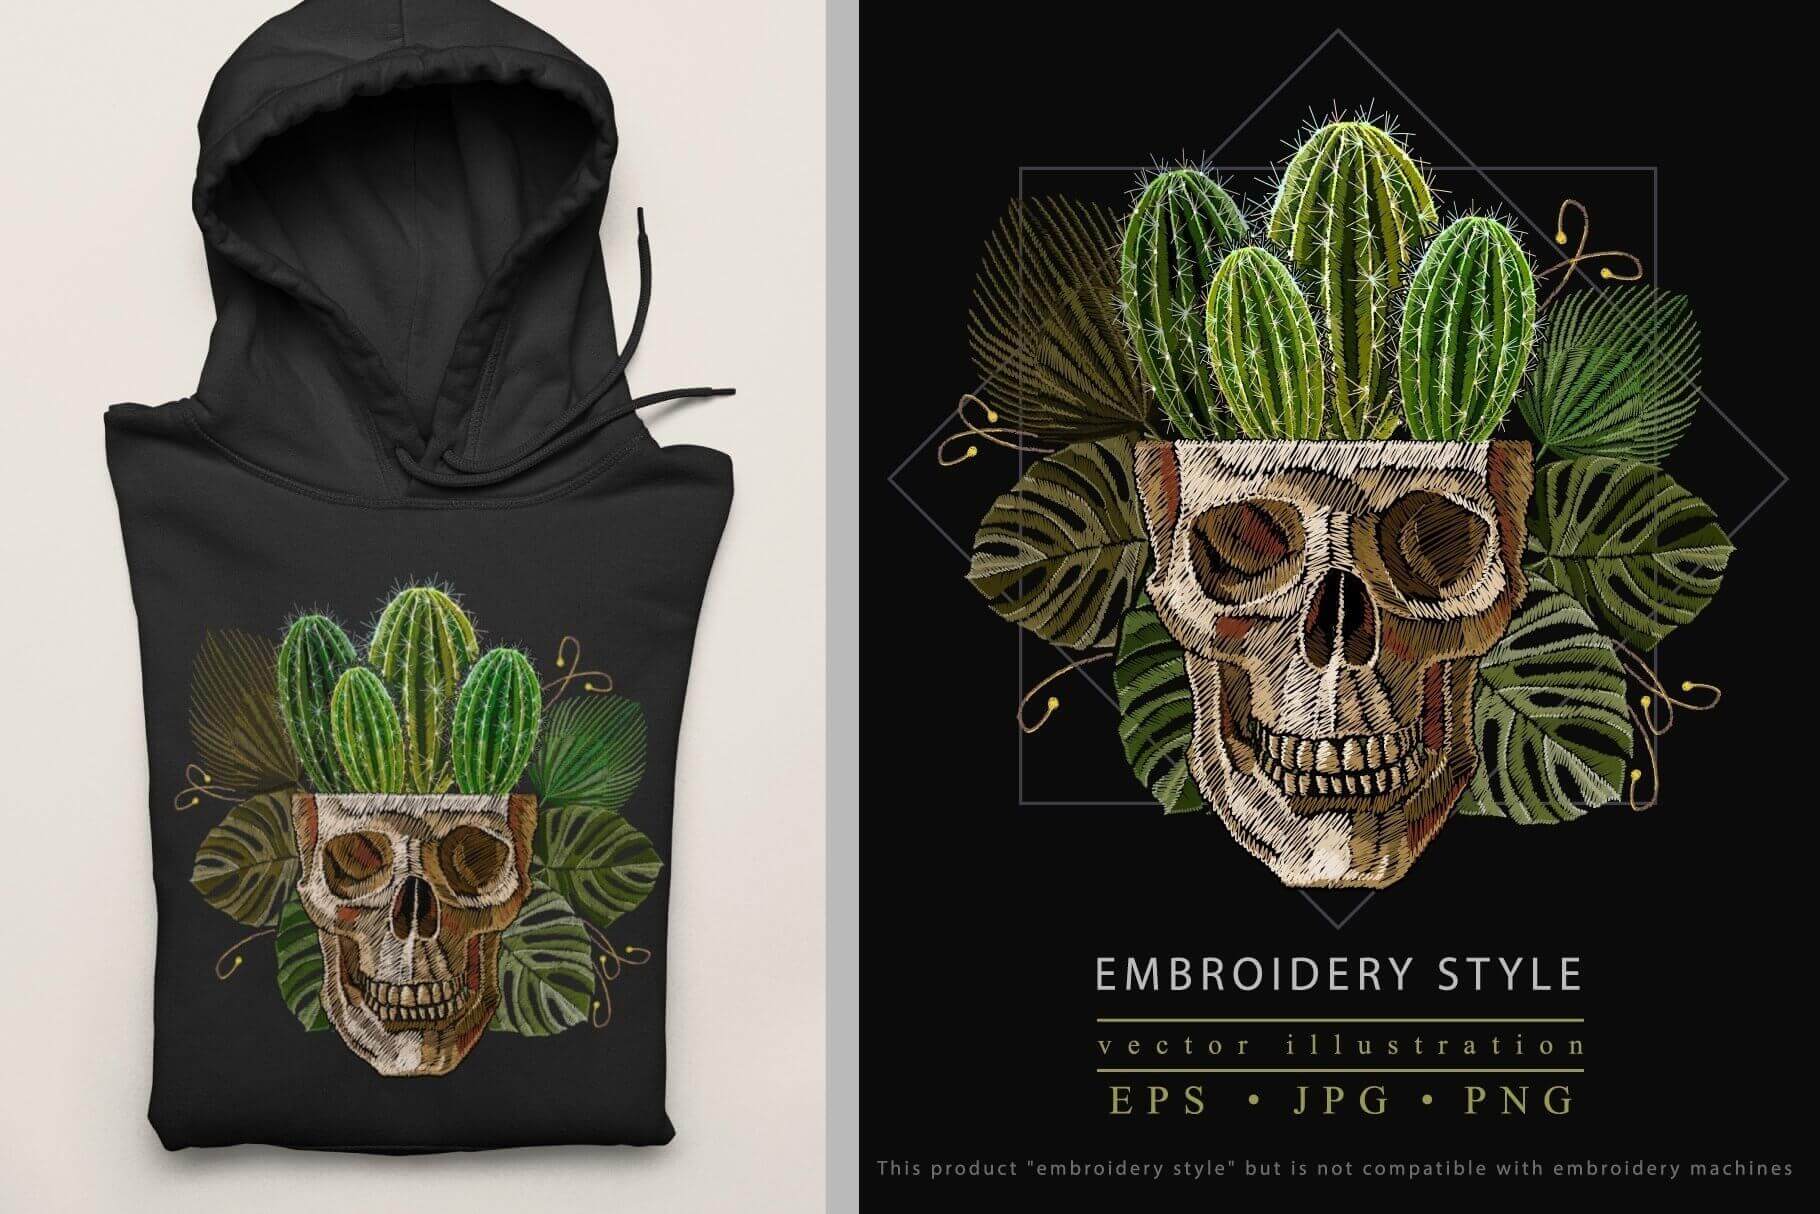 Embroidery of a skull from which cacti grow on a pullover.